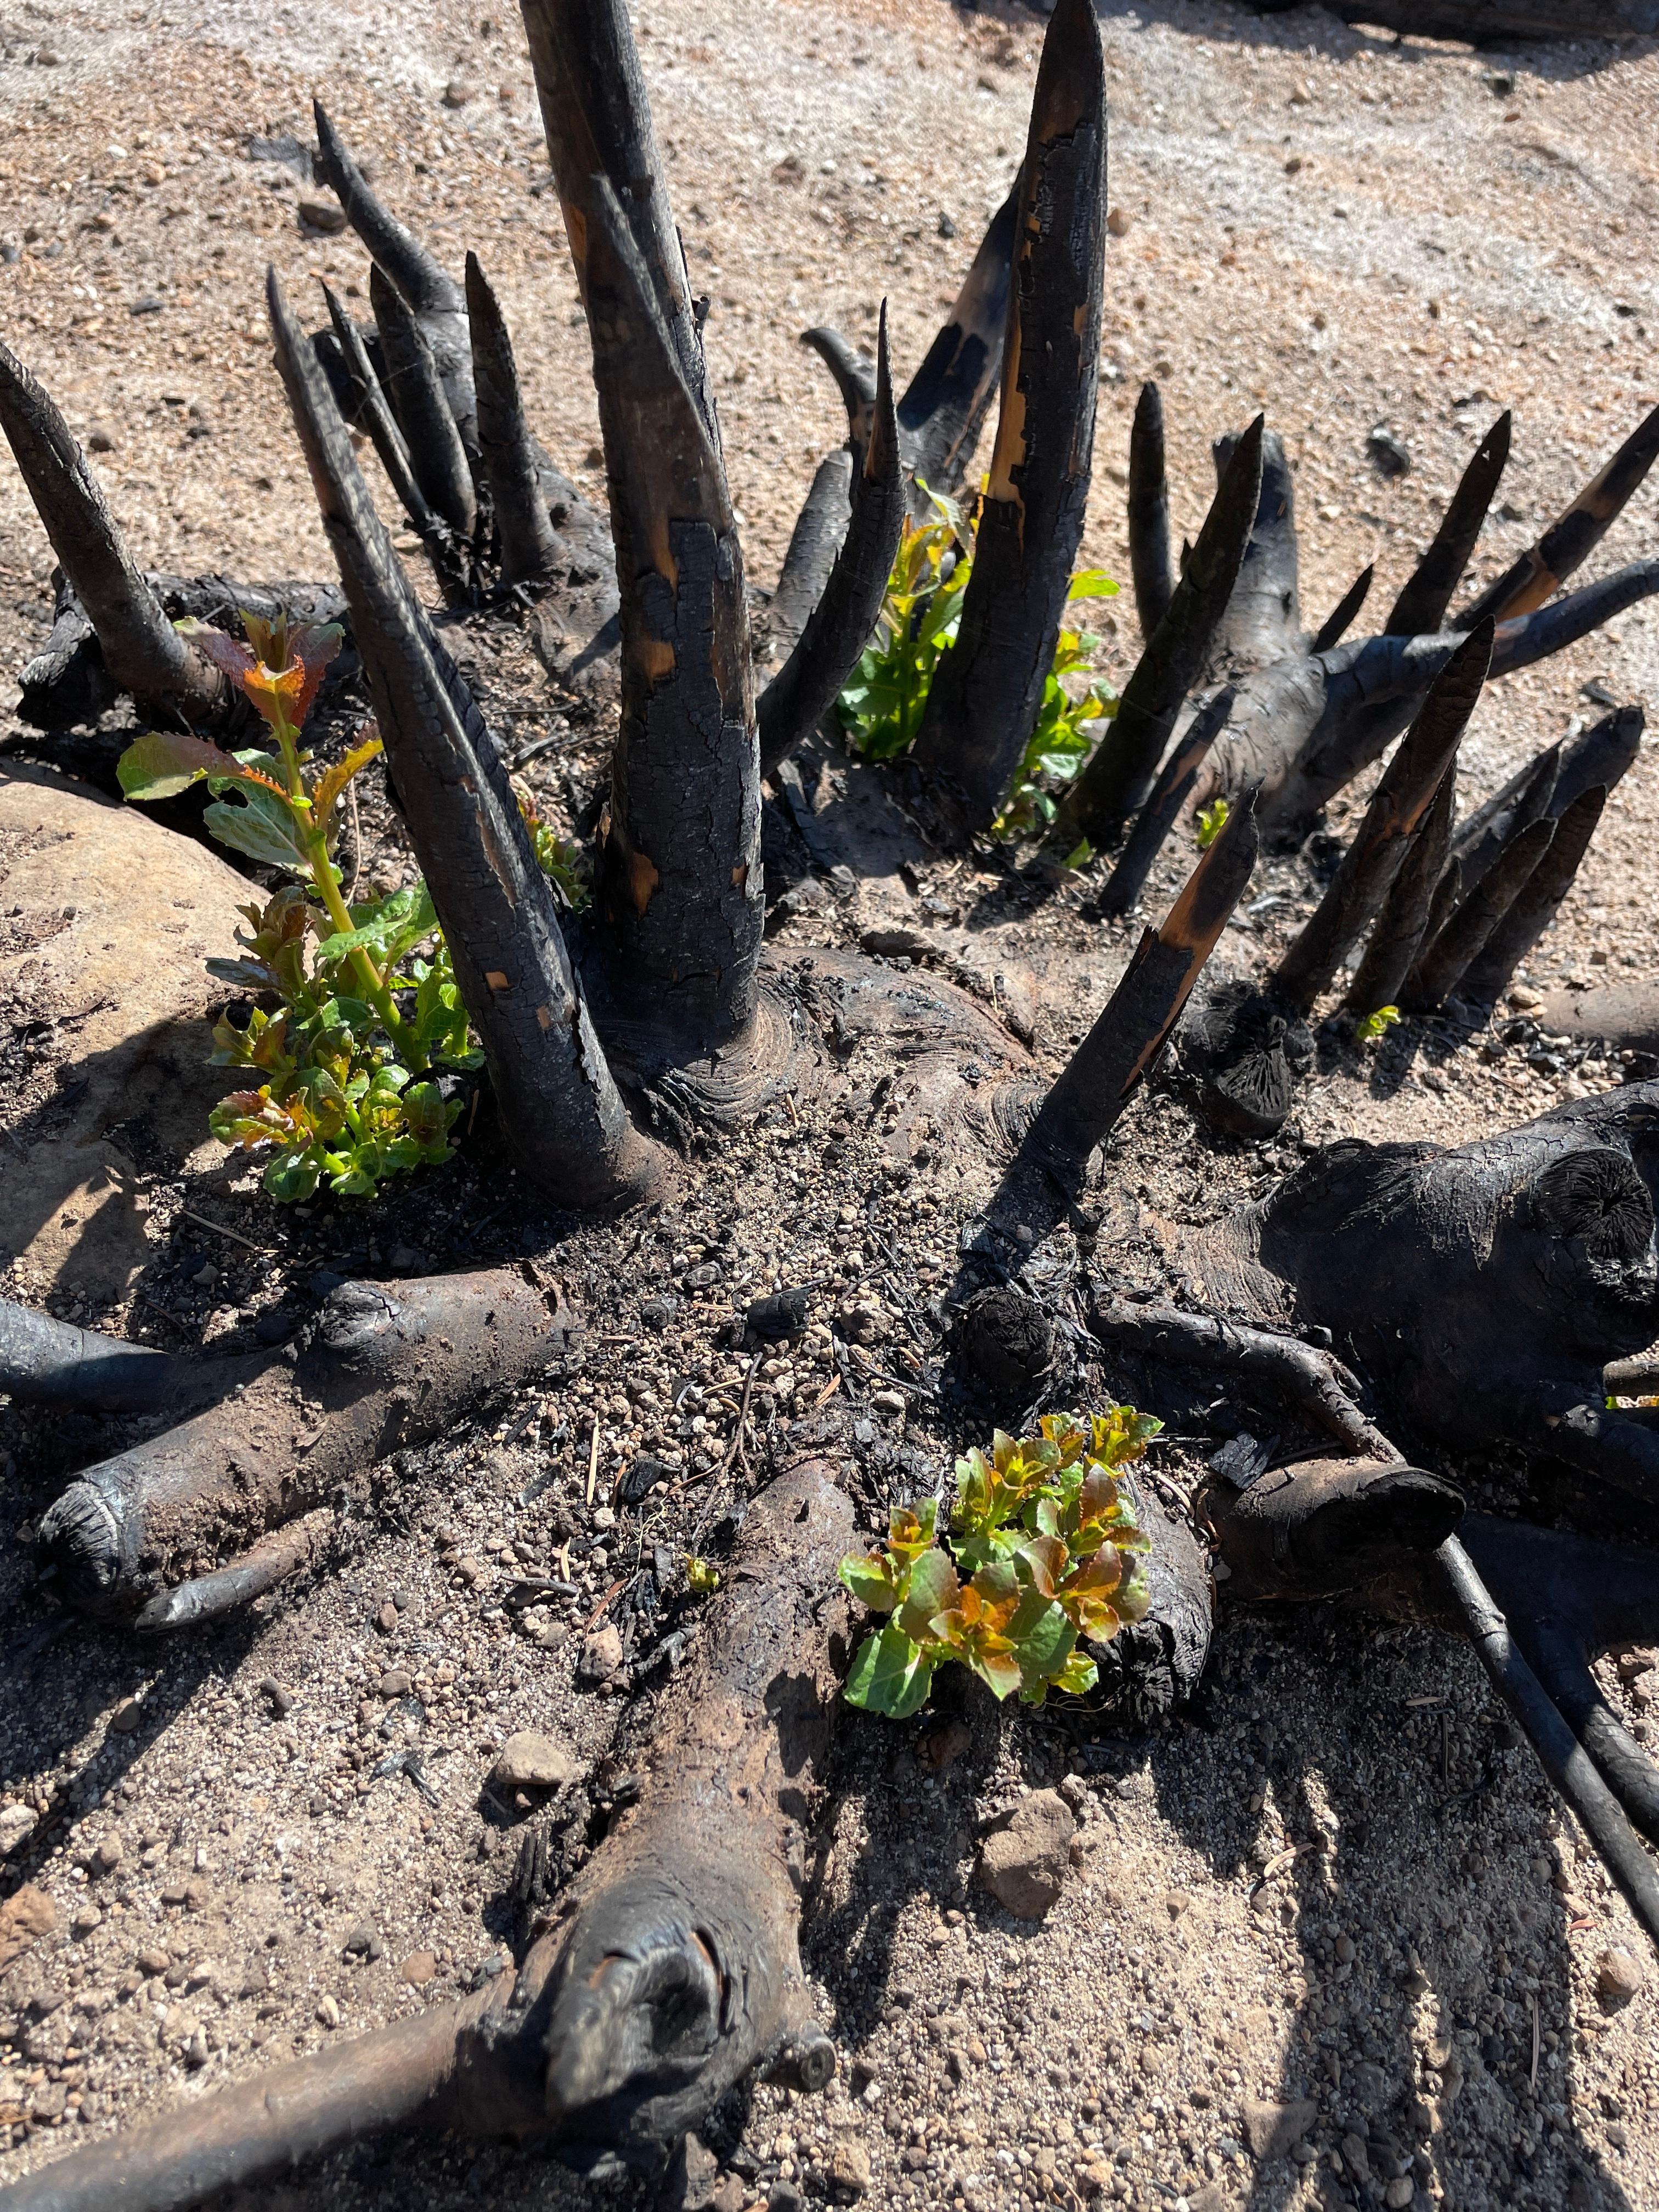 BAER team members have observed plant species are already showing signs of regrowth post-fire.